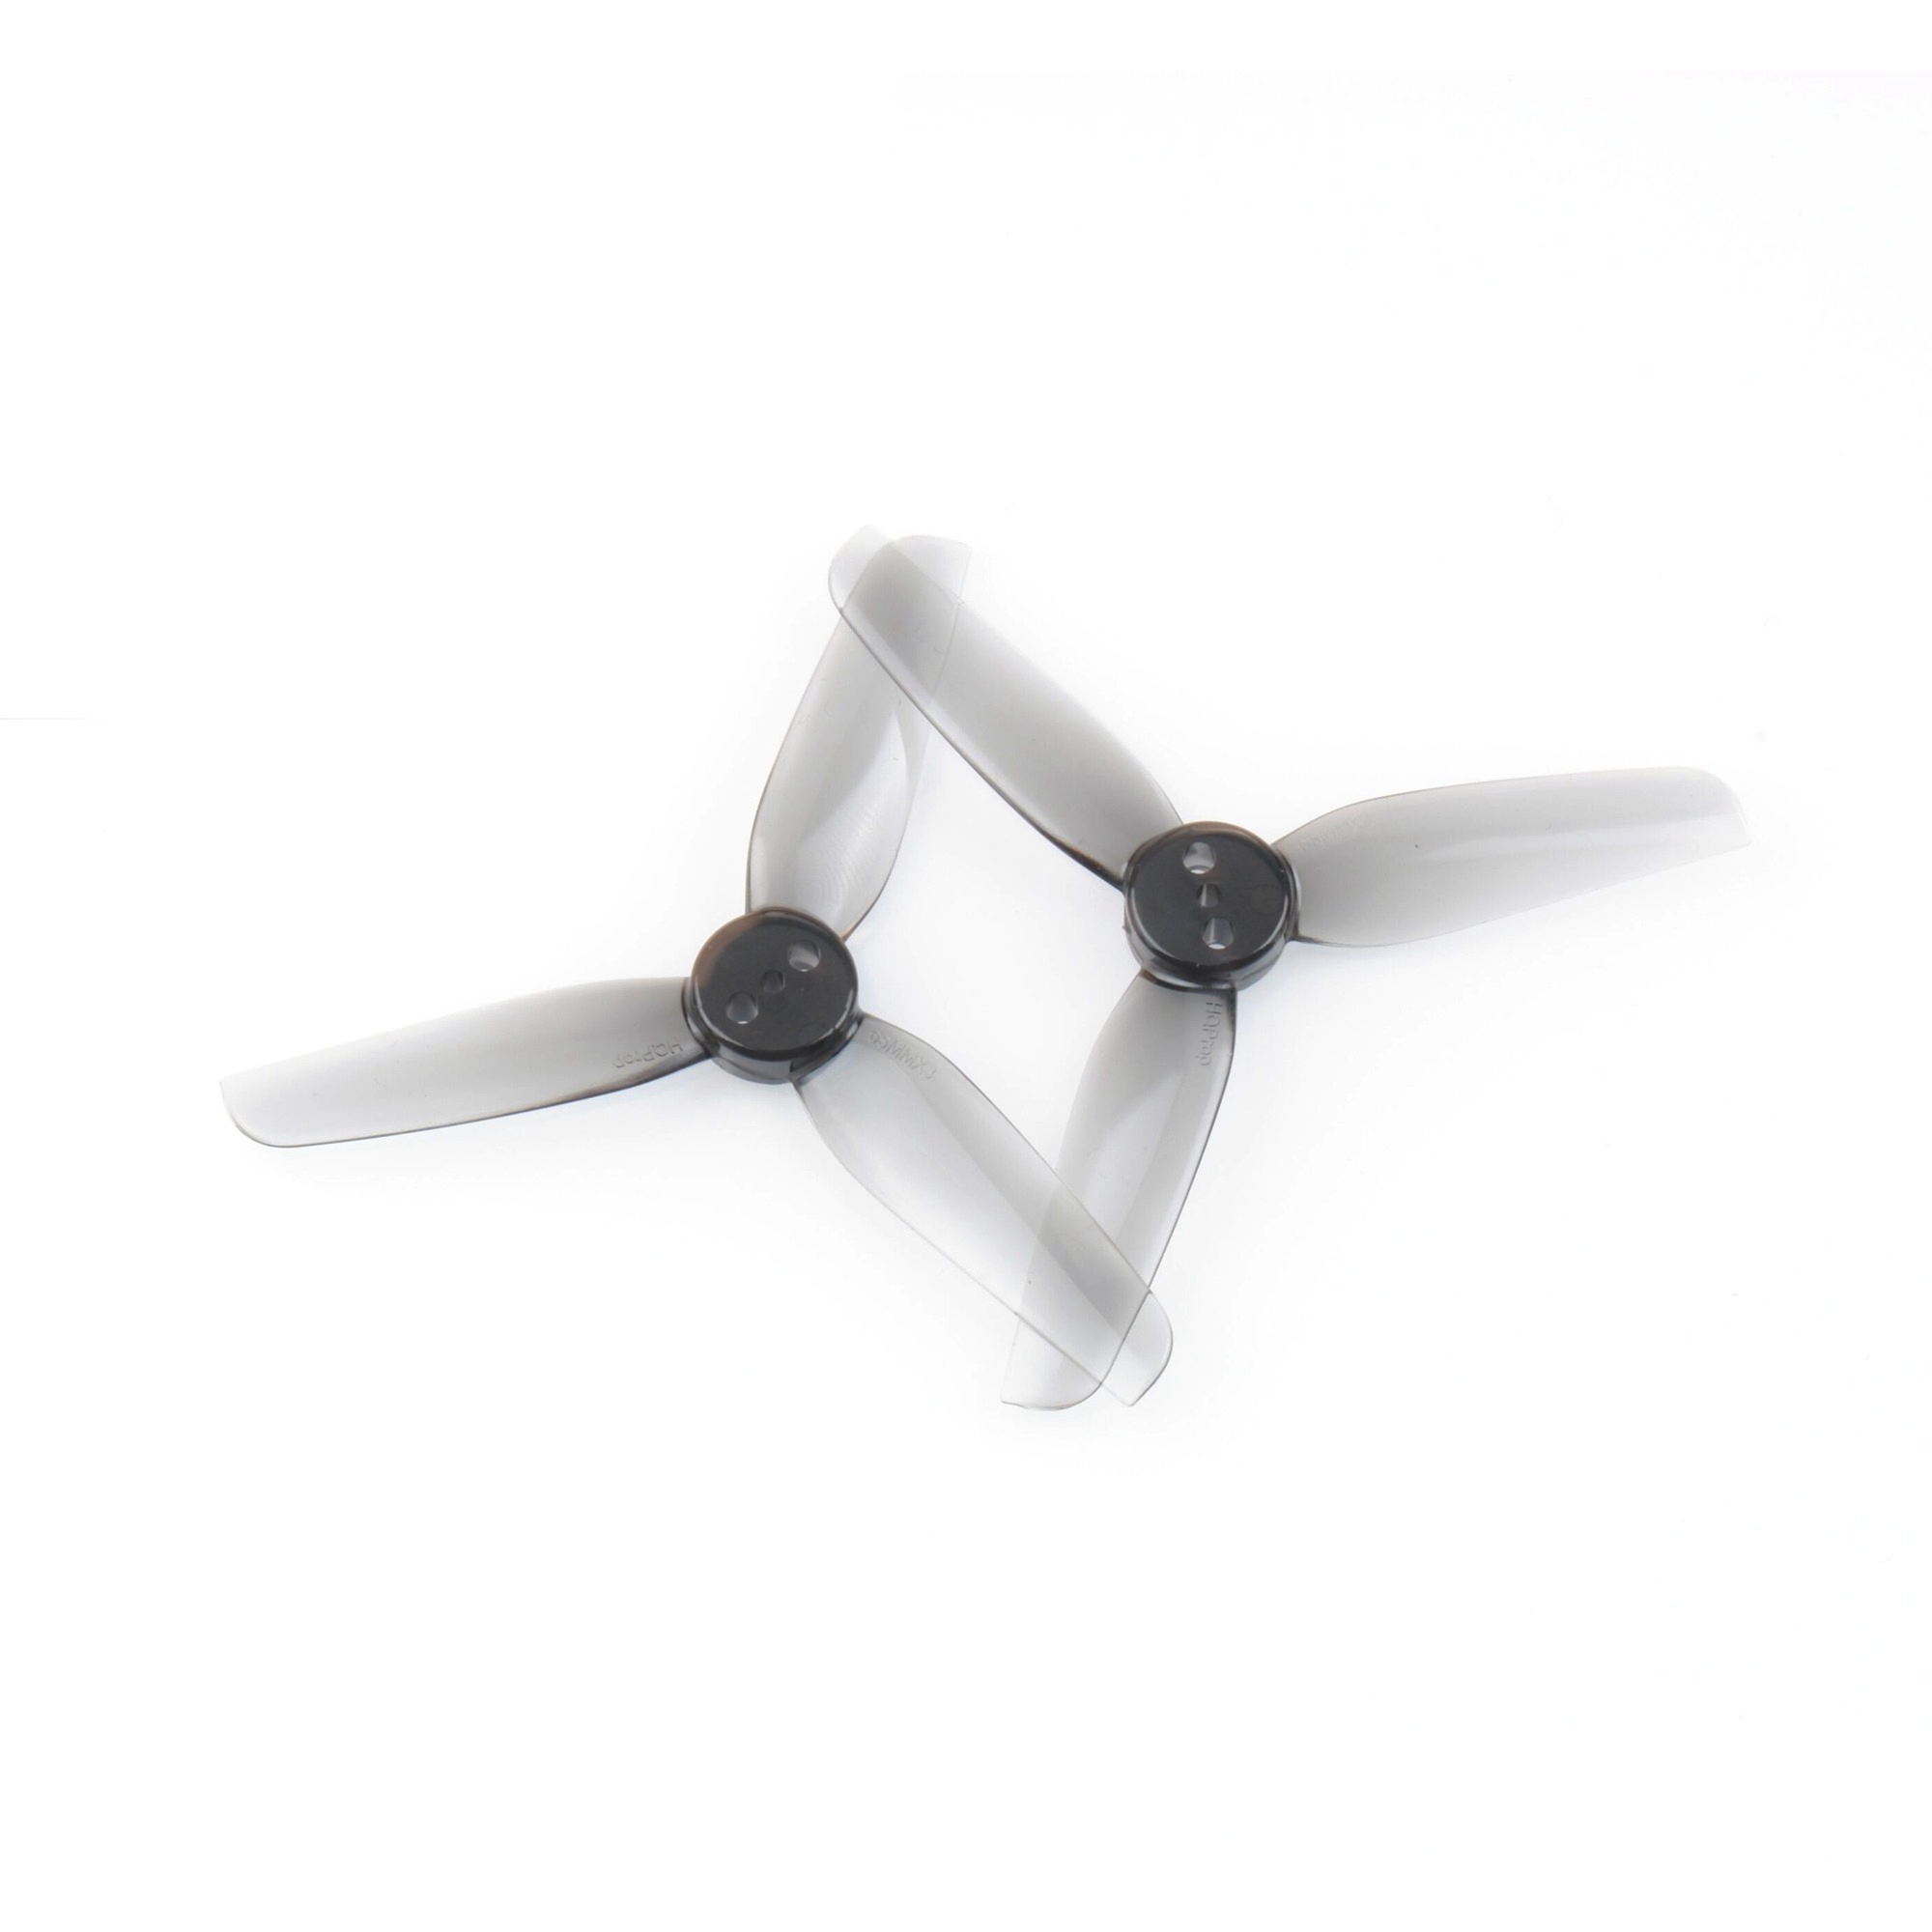 2 Pairs HQ Prop Durable T65MMX3 65mm 2.5 Inch 3-blade PC Propeller 2CW+2CCW for Toothpick TWIG Whoop RC Drone FPV Racing - Photo: 3